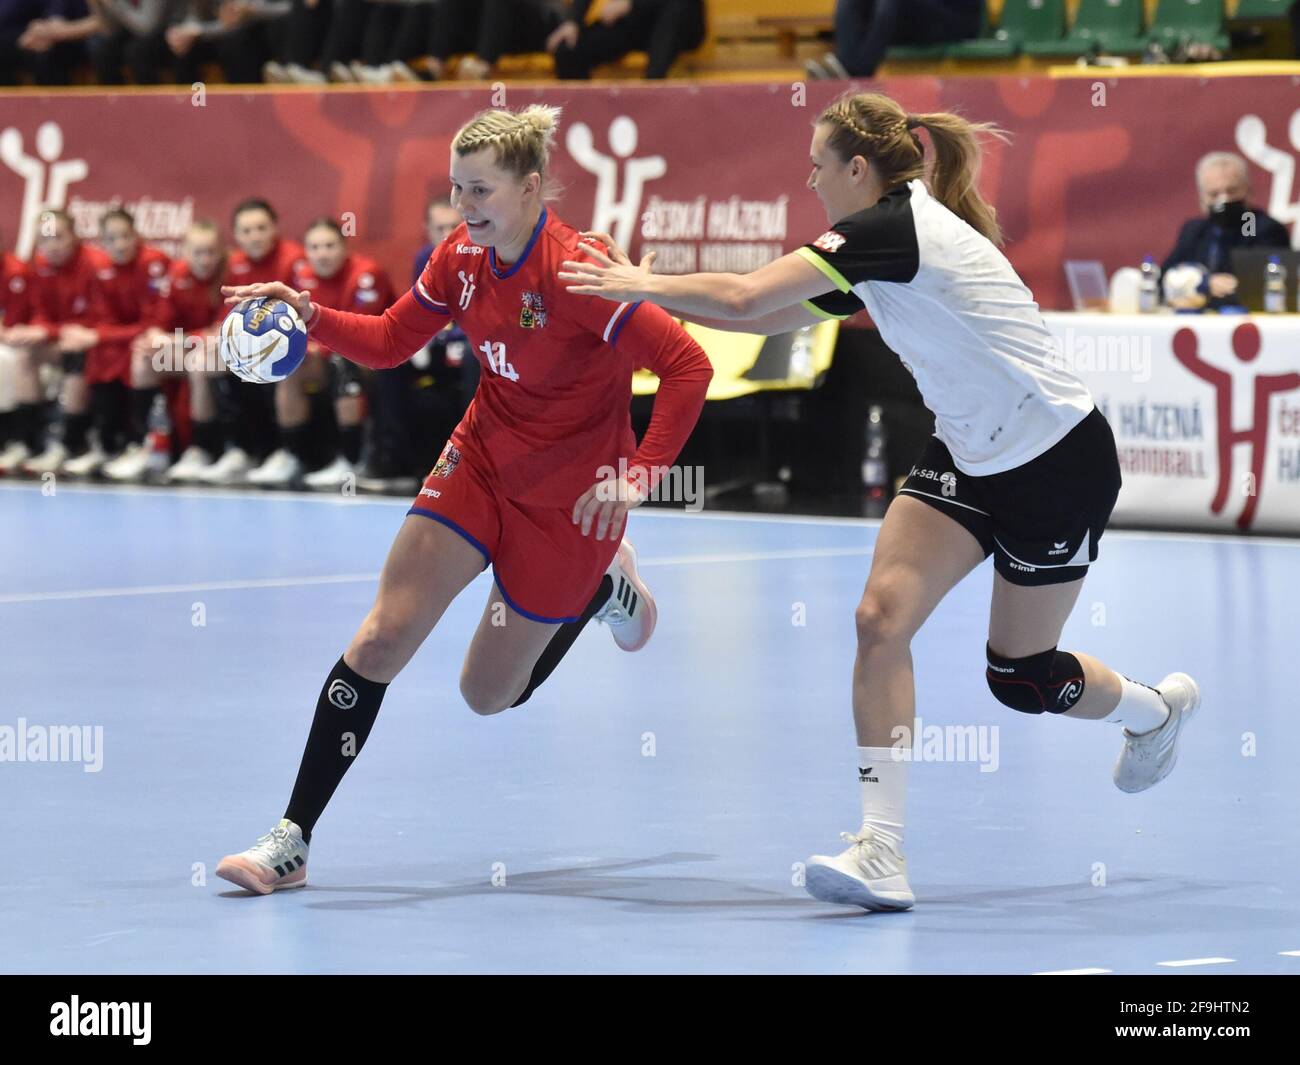 Zubri, Czech Republic. 17th Apr, 2021. Kamila Kordovska (CZE; left) in action during the opening match of the play-off qualification for the IHF World Women's Handball Championship, Czech Republic vs Switzerland, on April 17, 2021 in Zubri, Czech Republic. Credit: Dalibor Gluck/CTK Photo/Alamy Live News Stock Photo